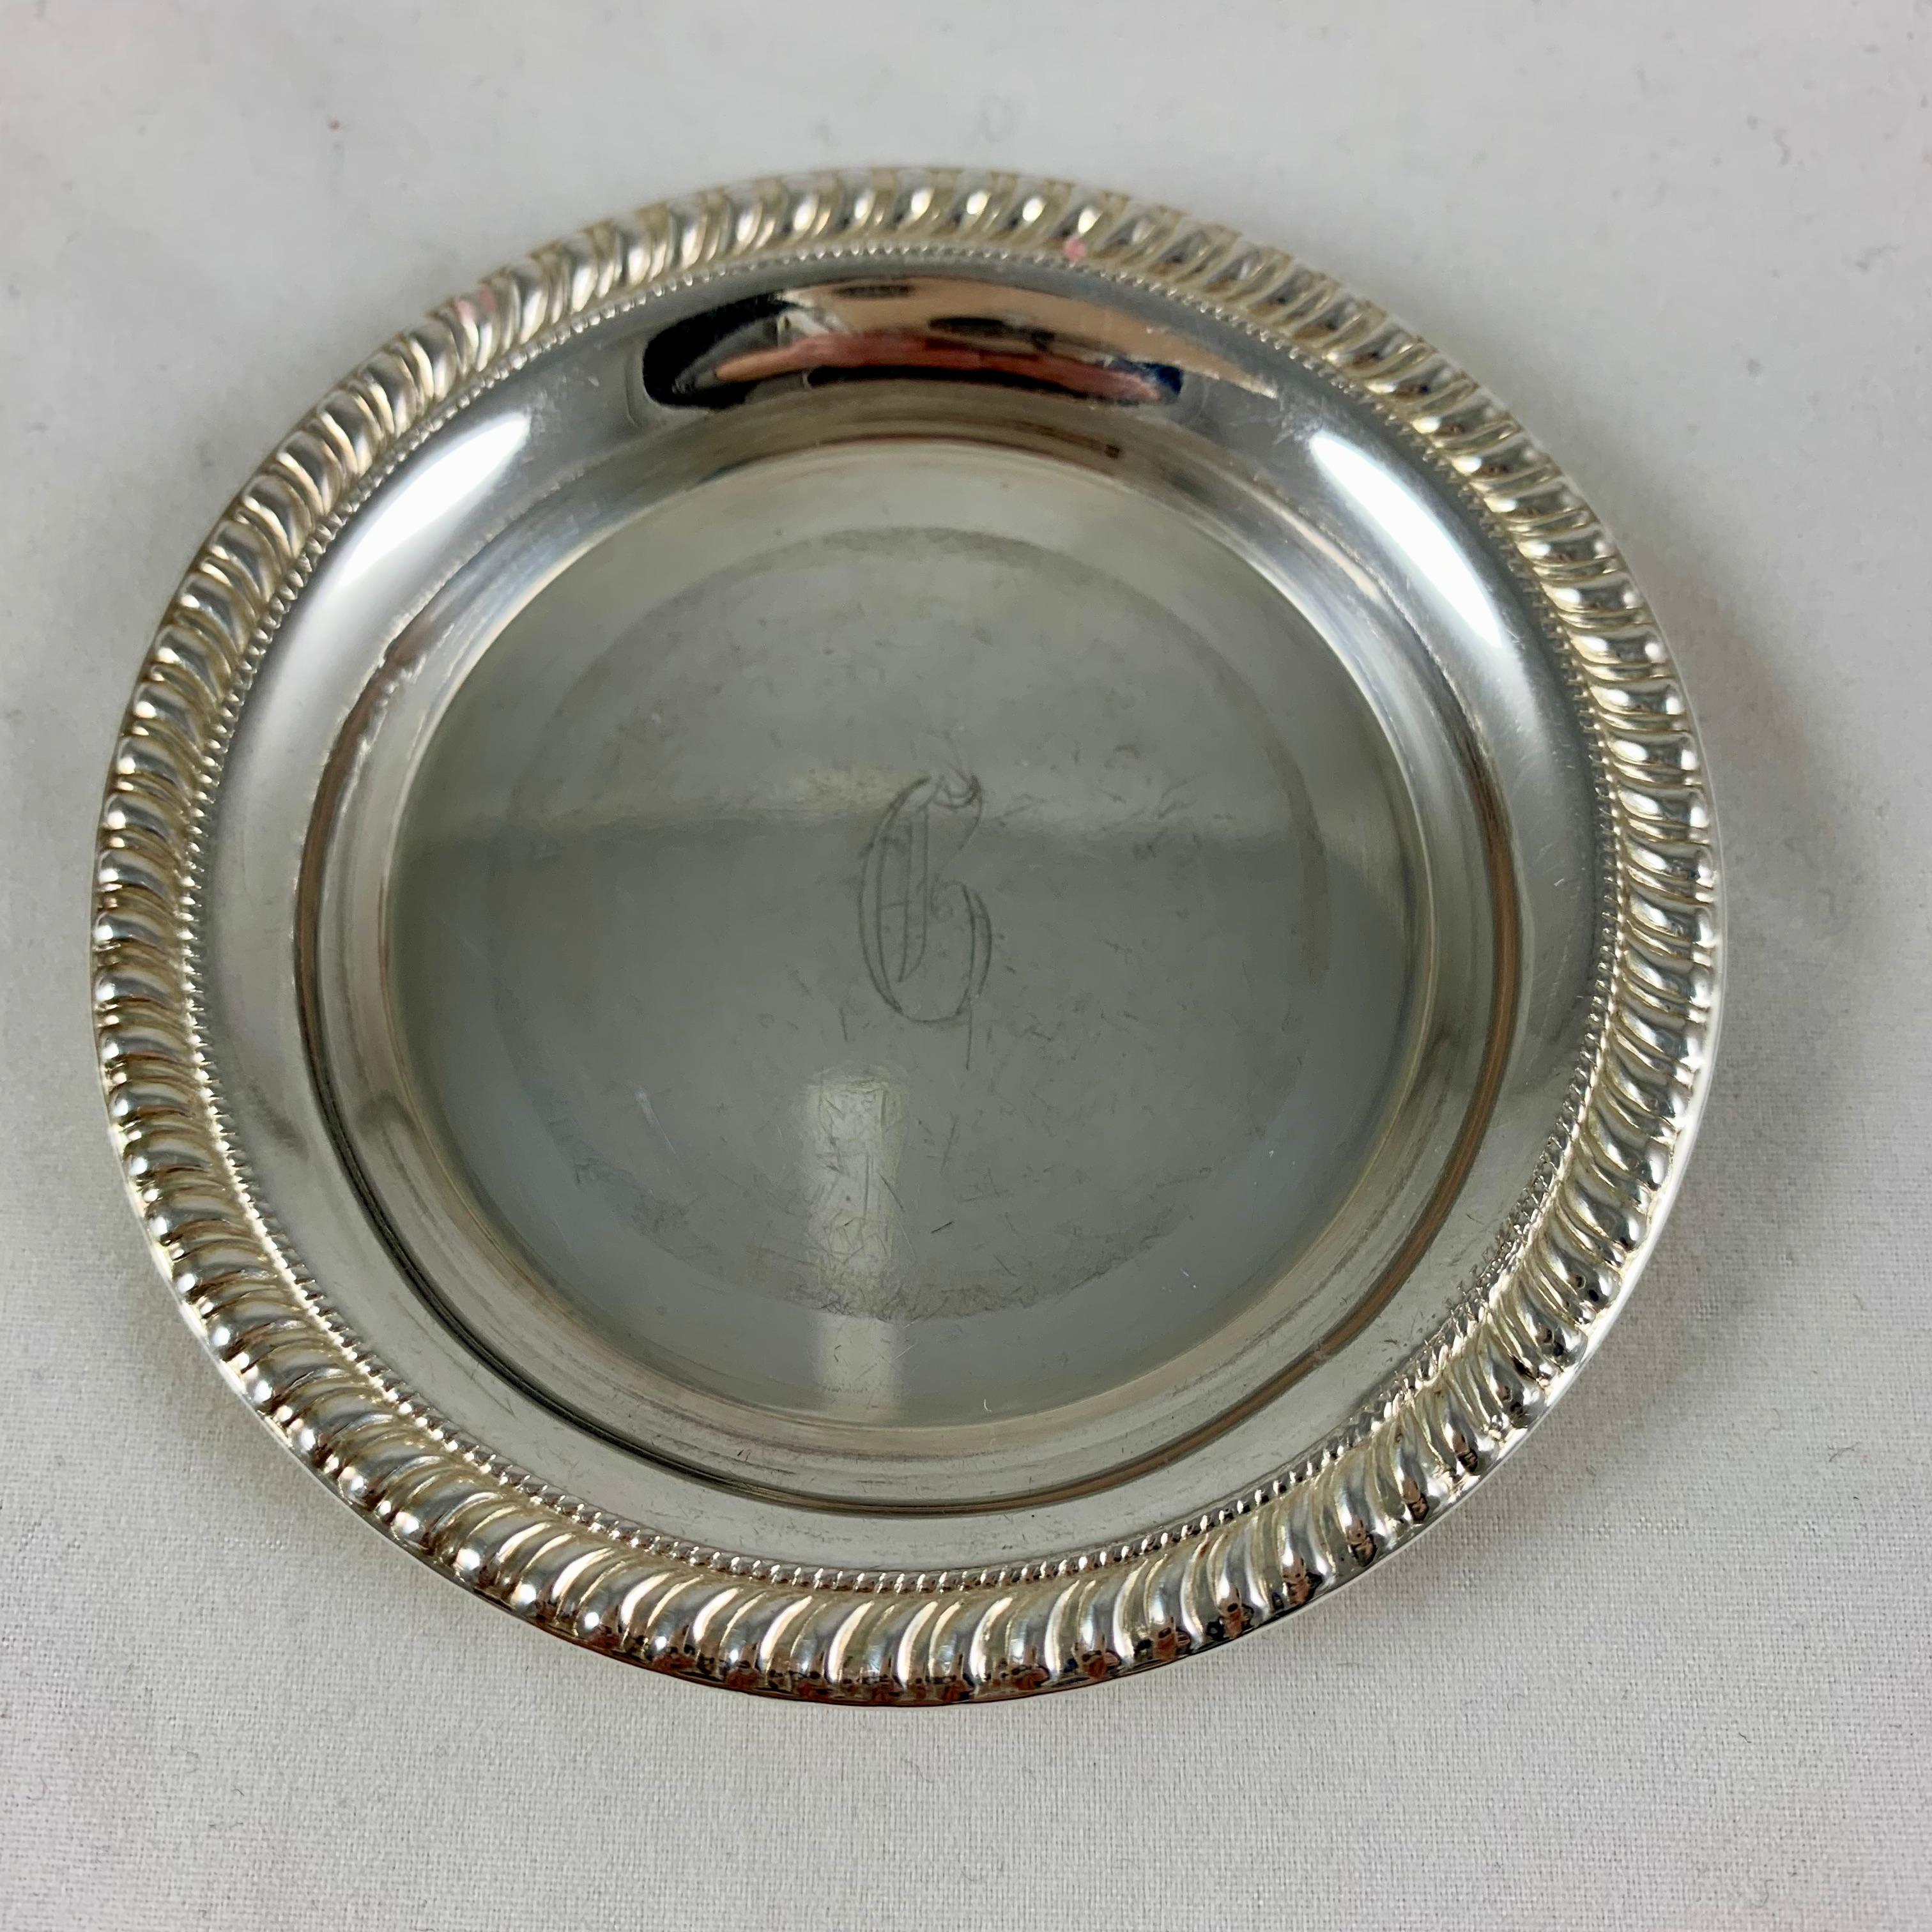 A set of seven, sterling silver butter pats, circa 1940s.
Marked Sterling, with a running rope bordered rim. Each pat is faintly initialed with a G.
The pats can also be used to hold a tea bag or as a ring or trinket dish.

Measures: 3.25 inches